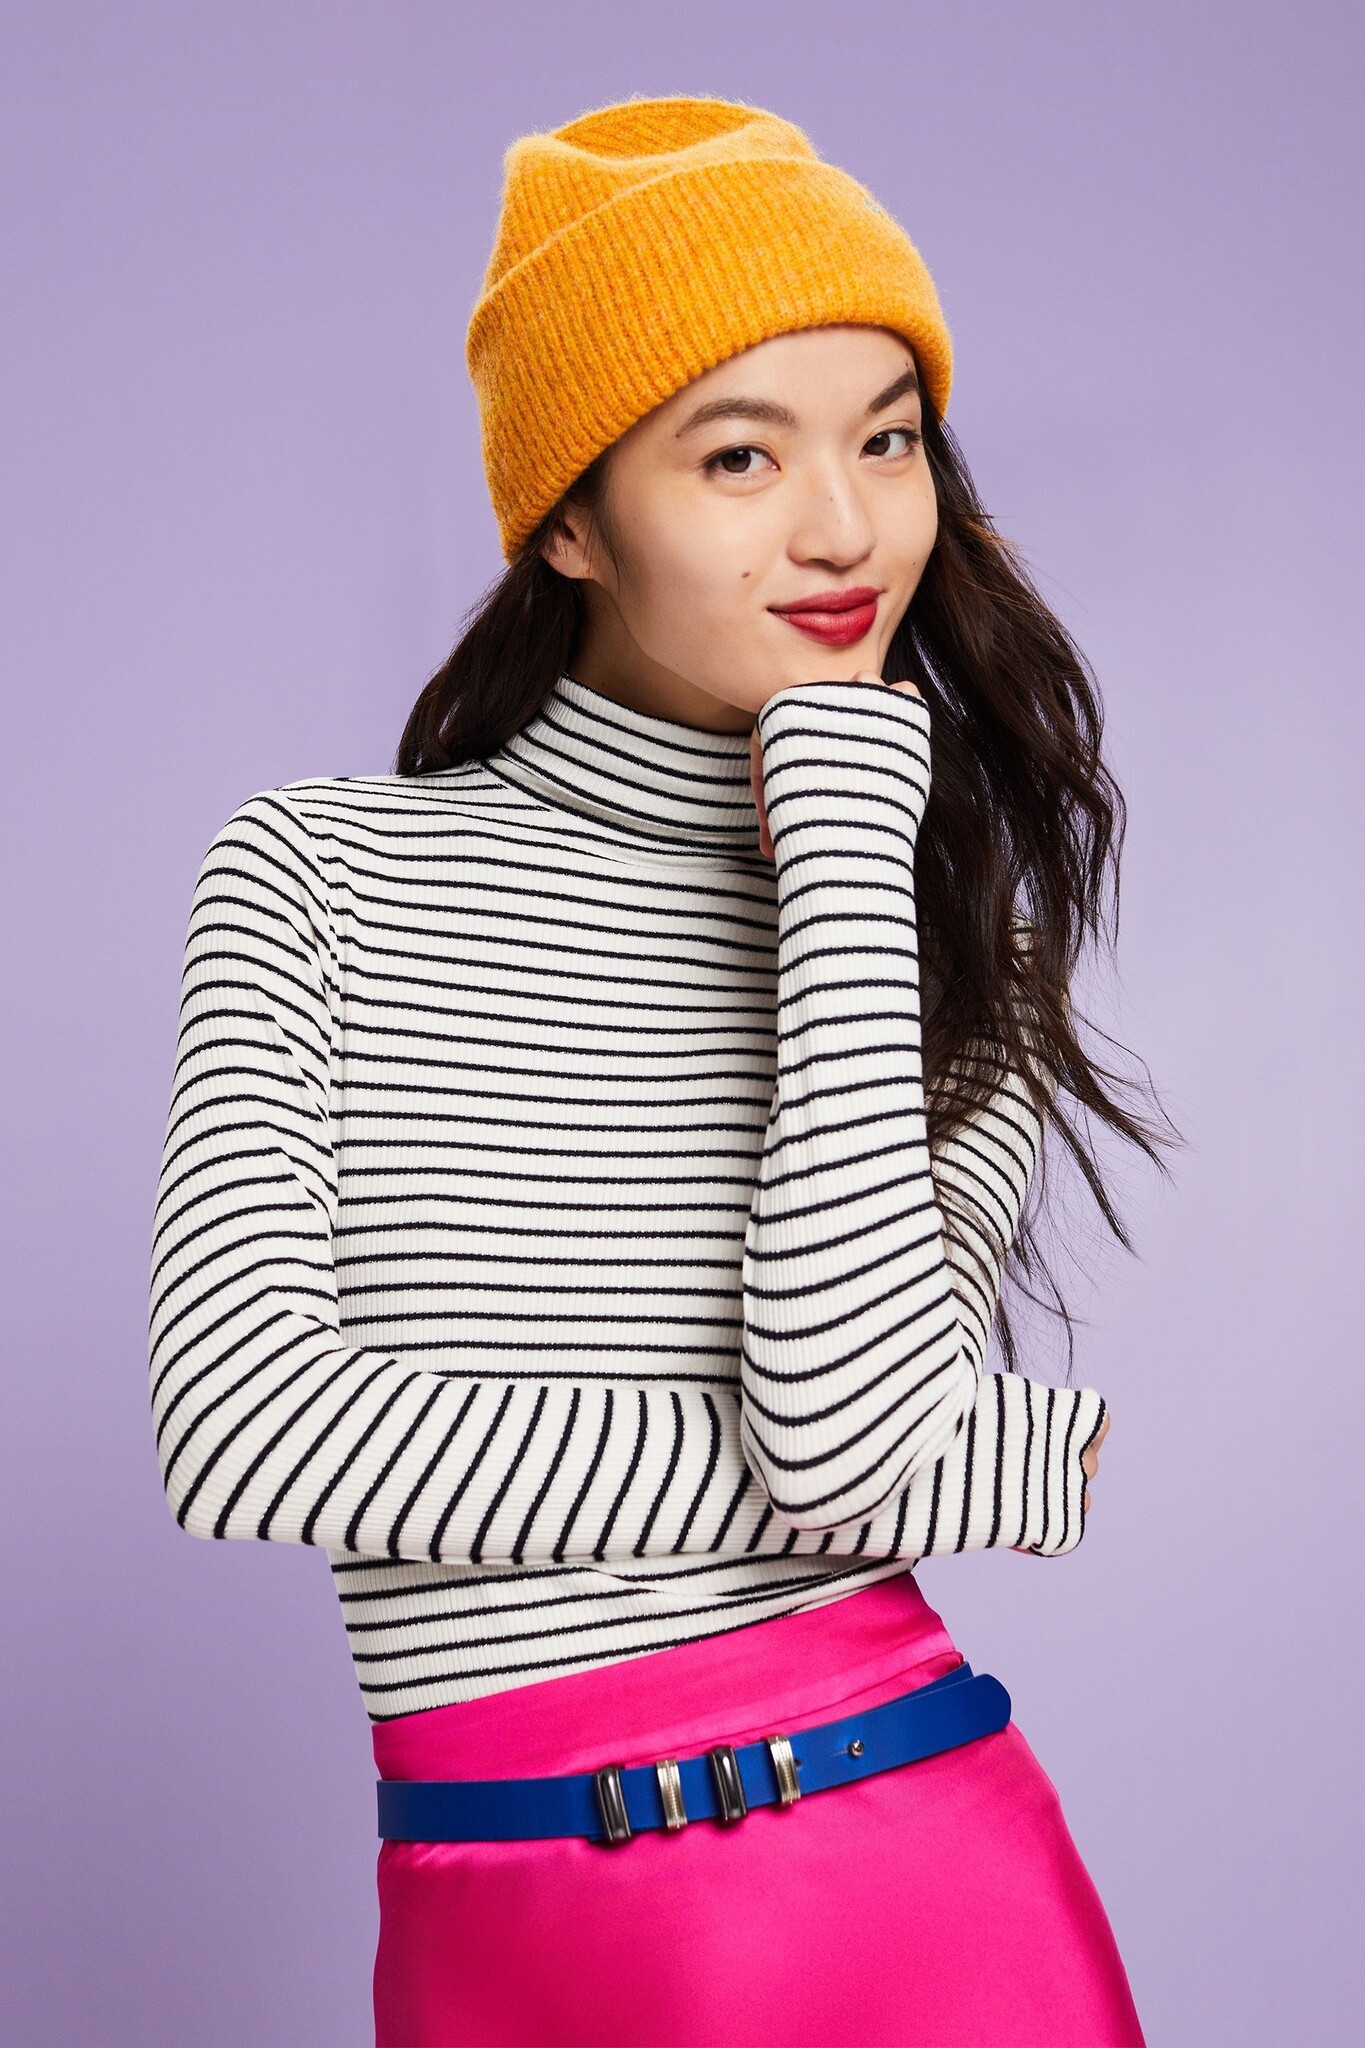 ESPRIT - Mock Neck Rib-Knit Sweater at our online shop